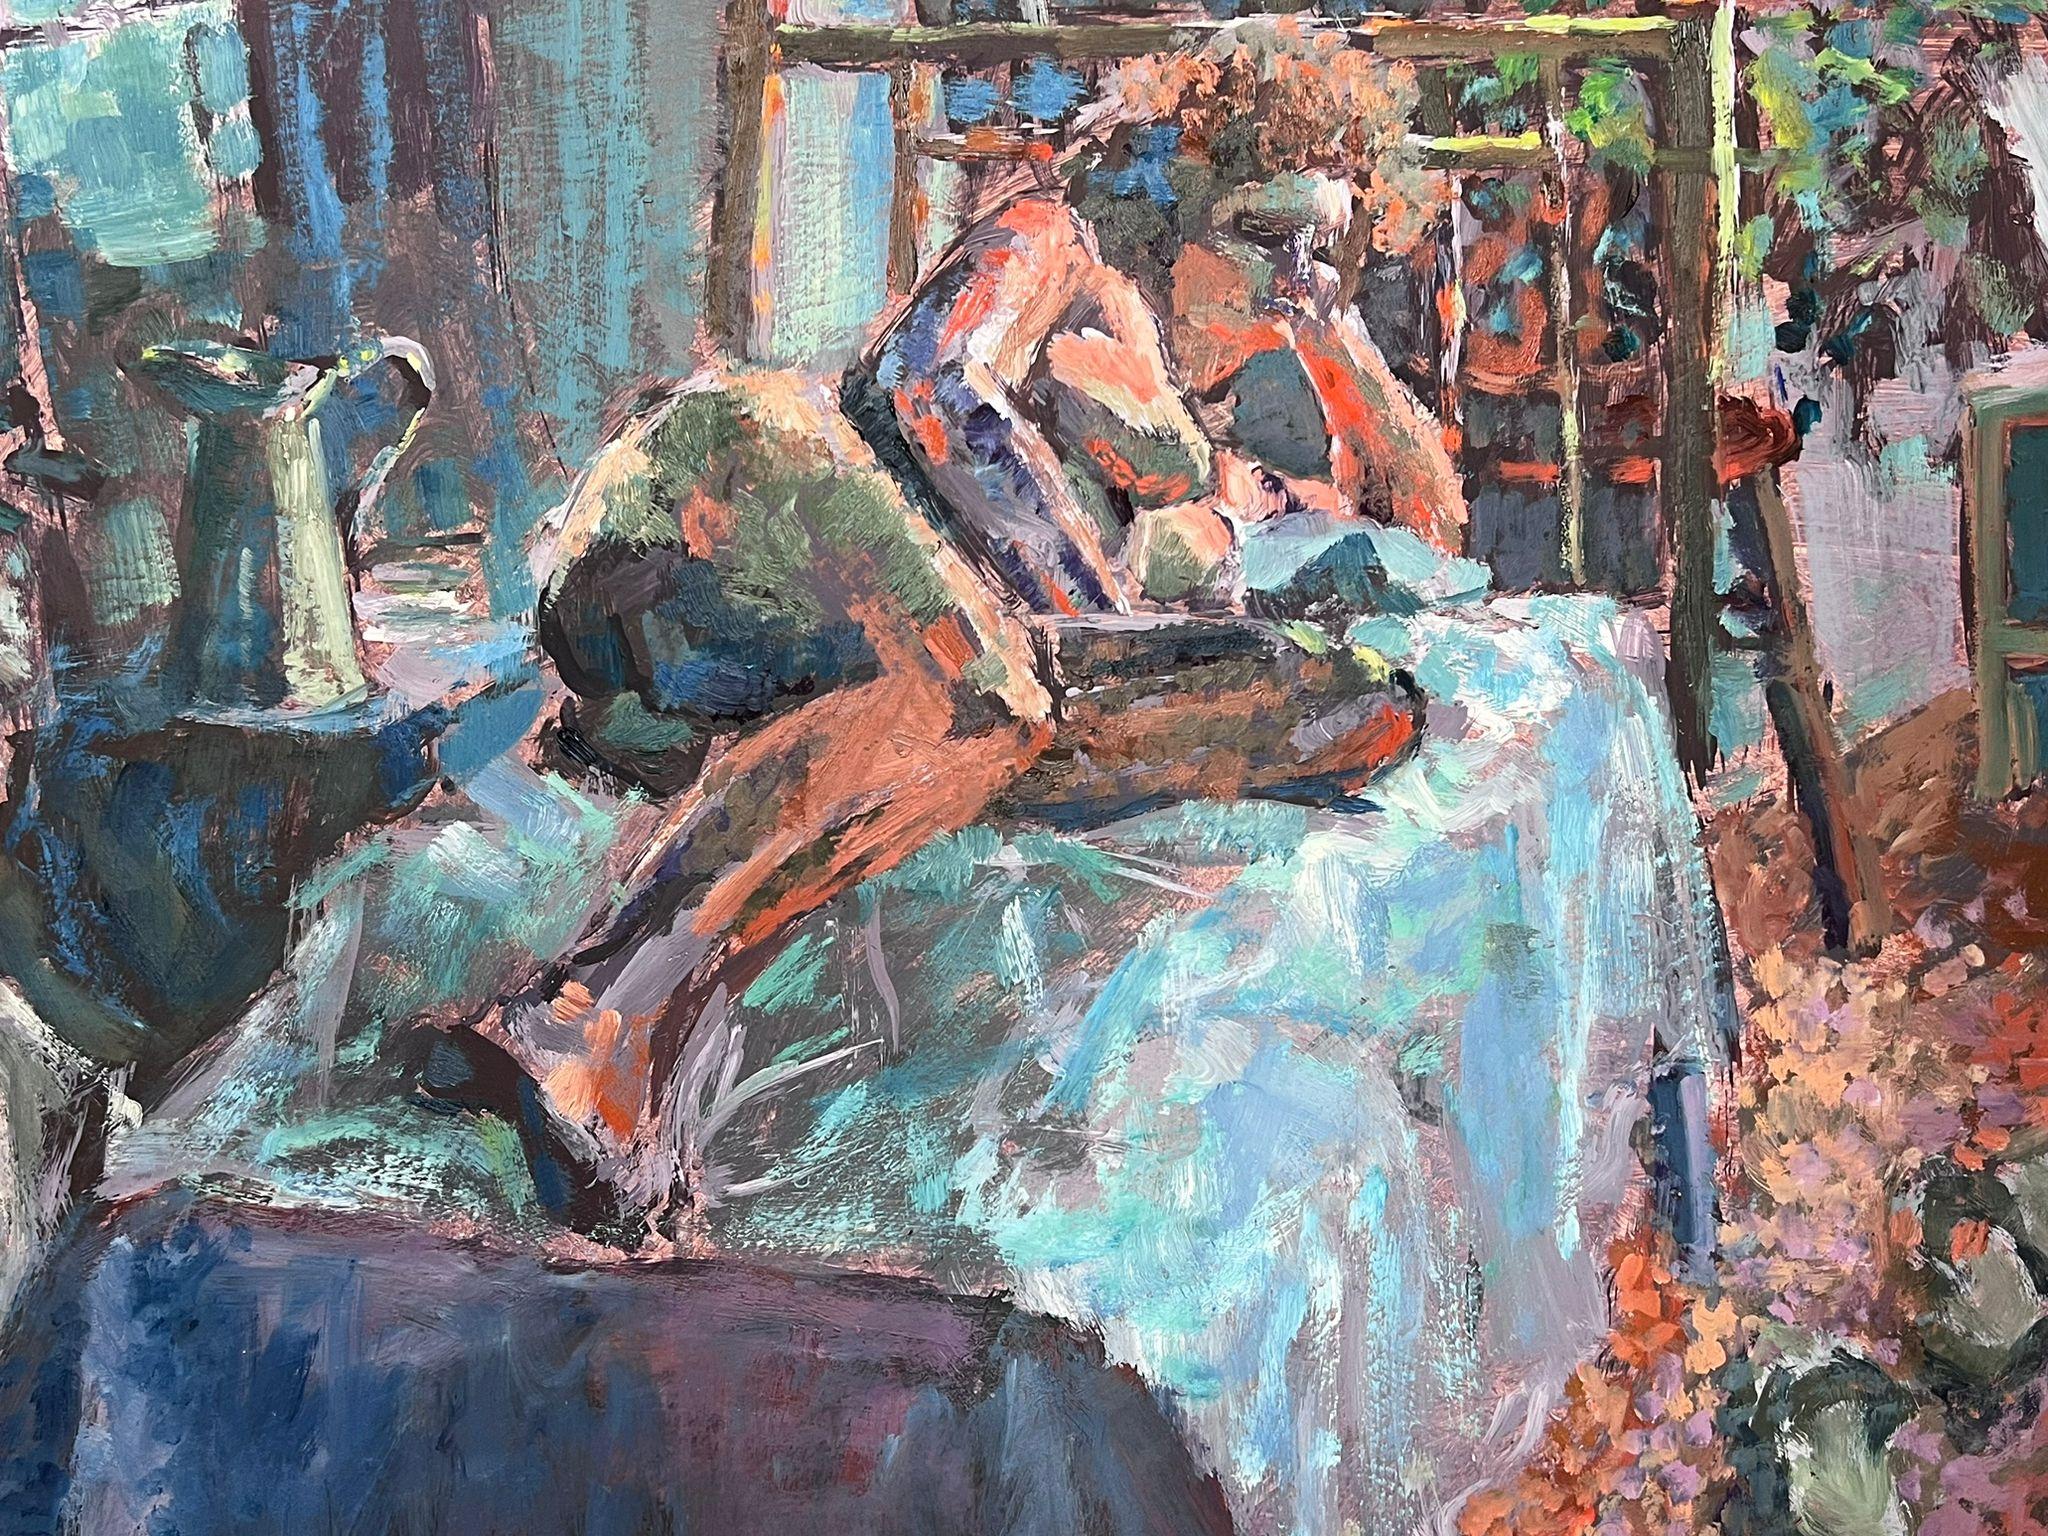 Nude Model
by Helen Greenfield (British 20th century) 
oil painting on board, unframed
board: 15.5 x 24 inches
condition: overall very good
provenance: all the paintings we have by this artist have come from their studio sale in England

Helen was a